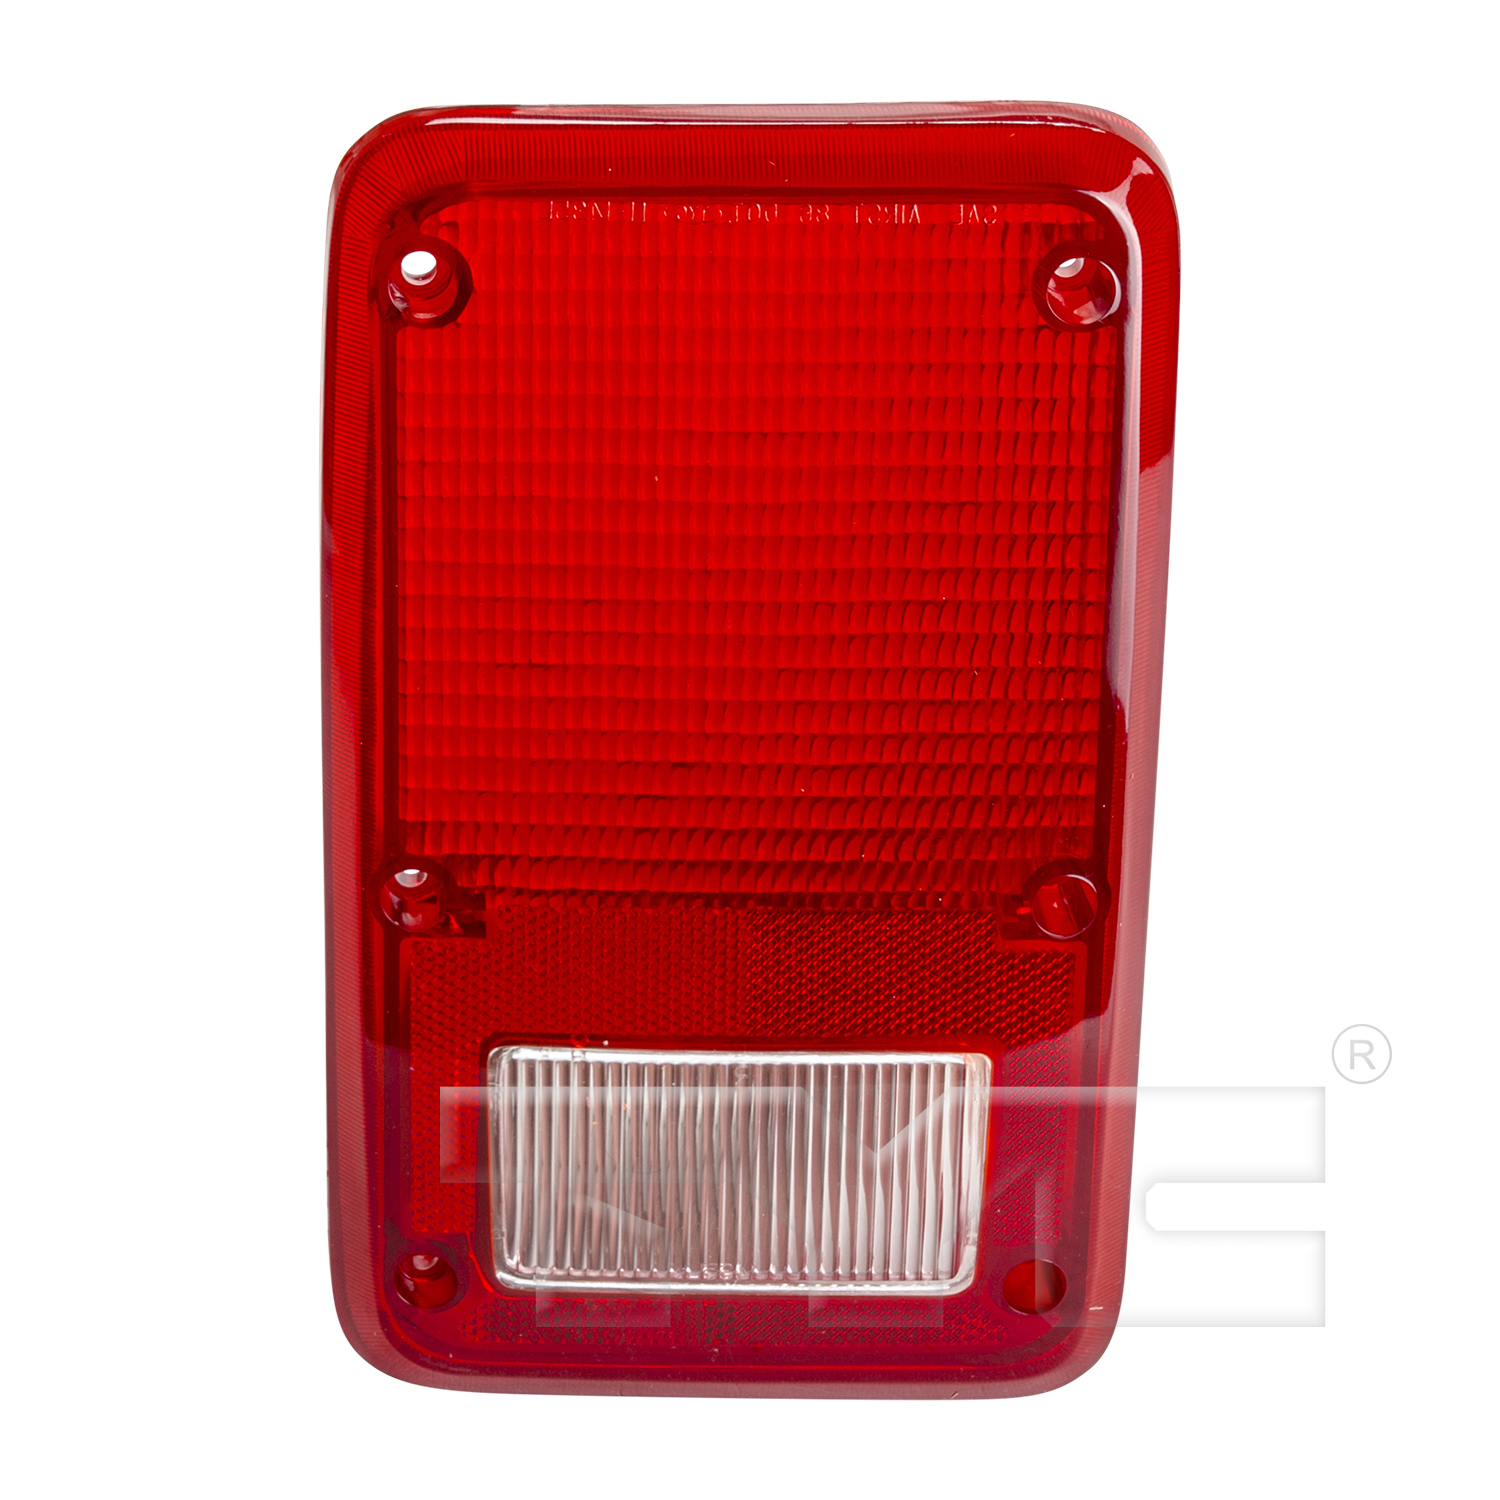 Aftermarket TAILLIGHTS for PLYMOUTH - PB150, PB150,81-83,LT Taillamp lens